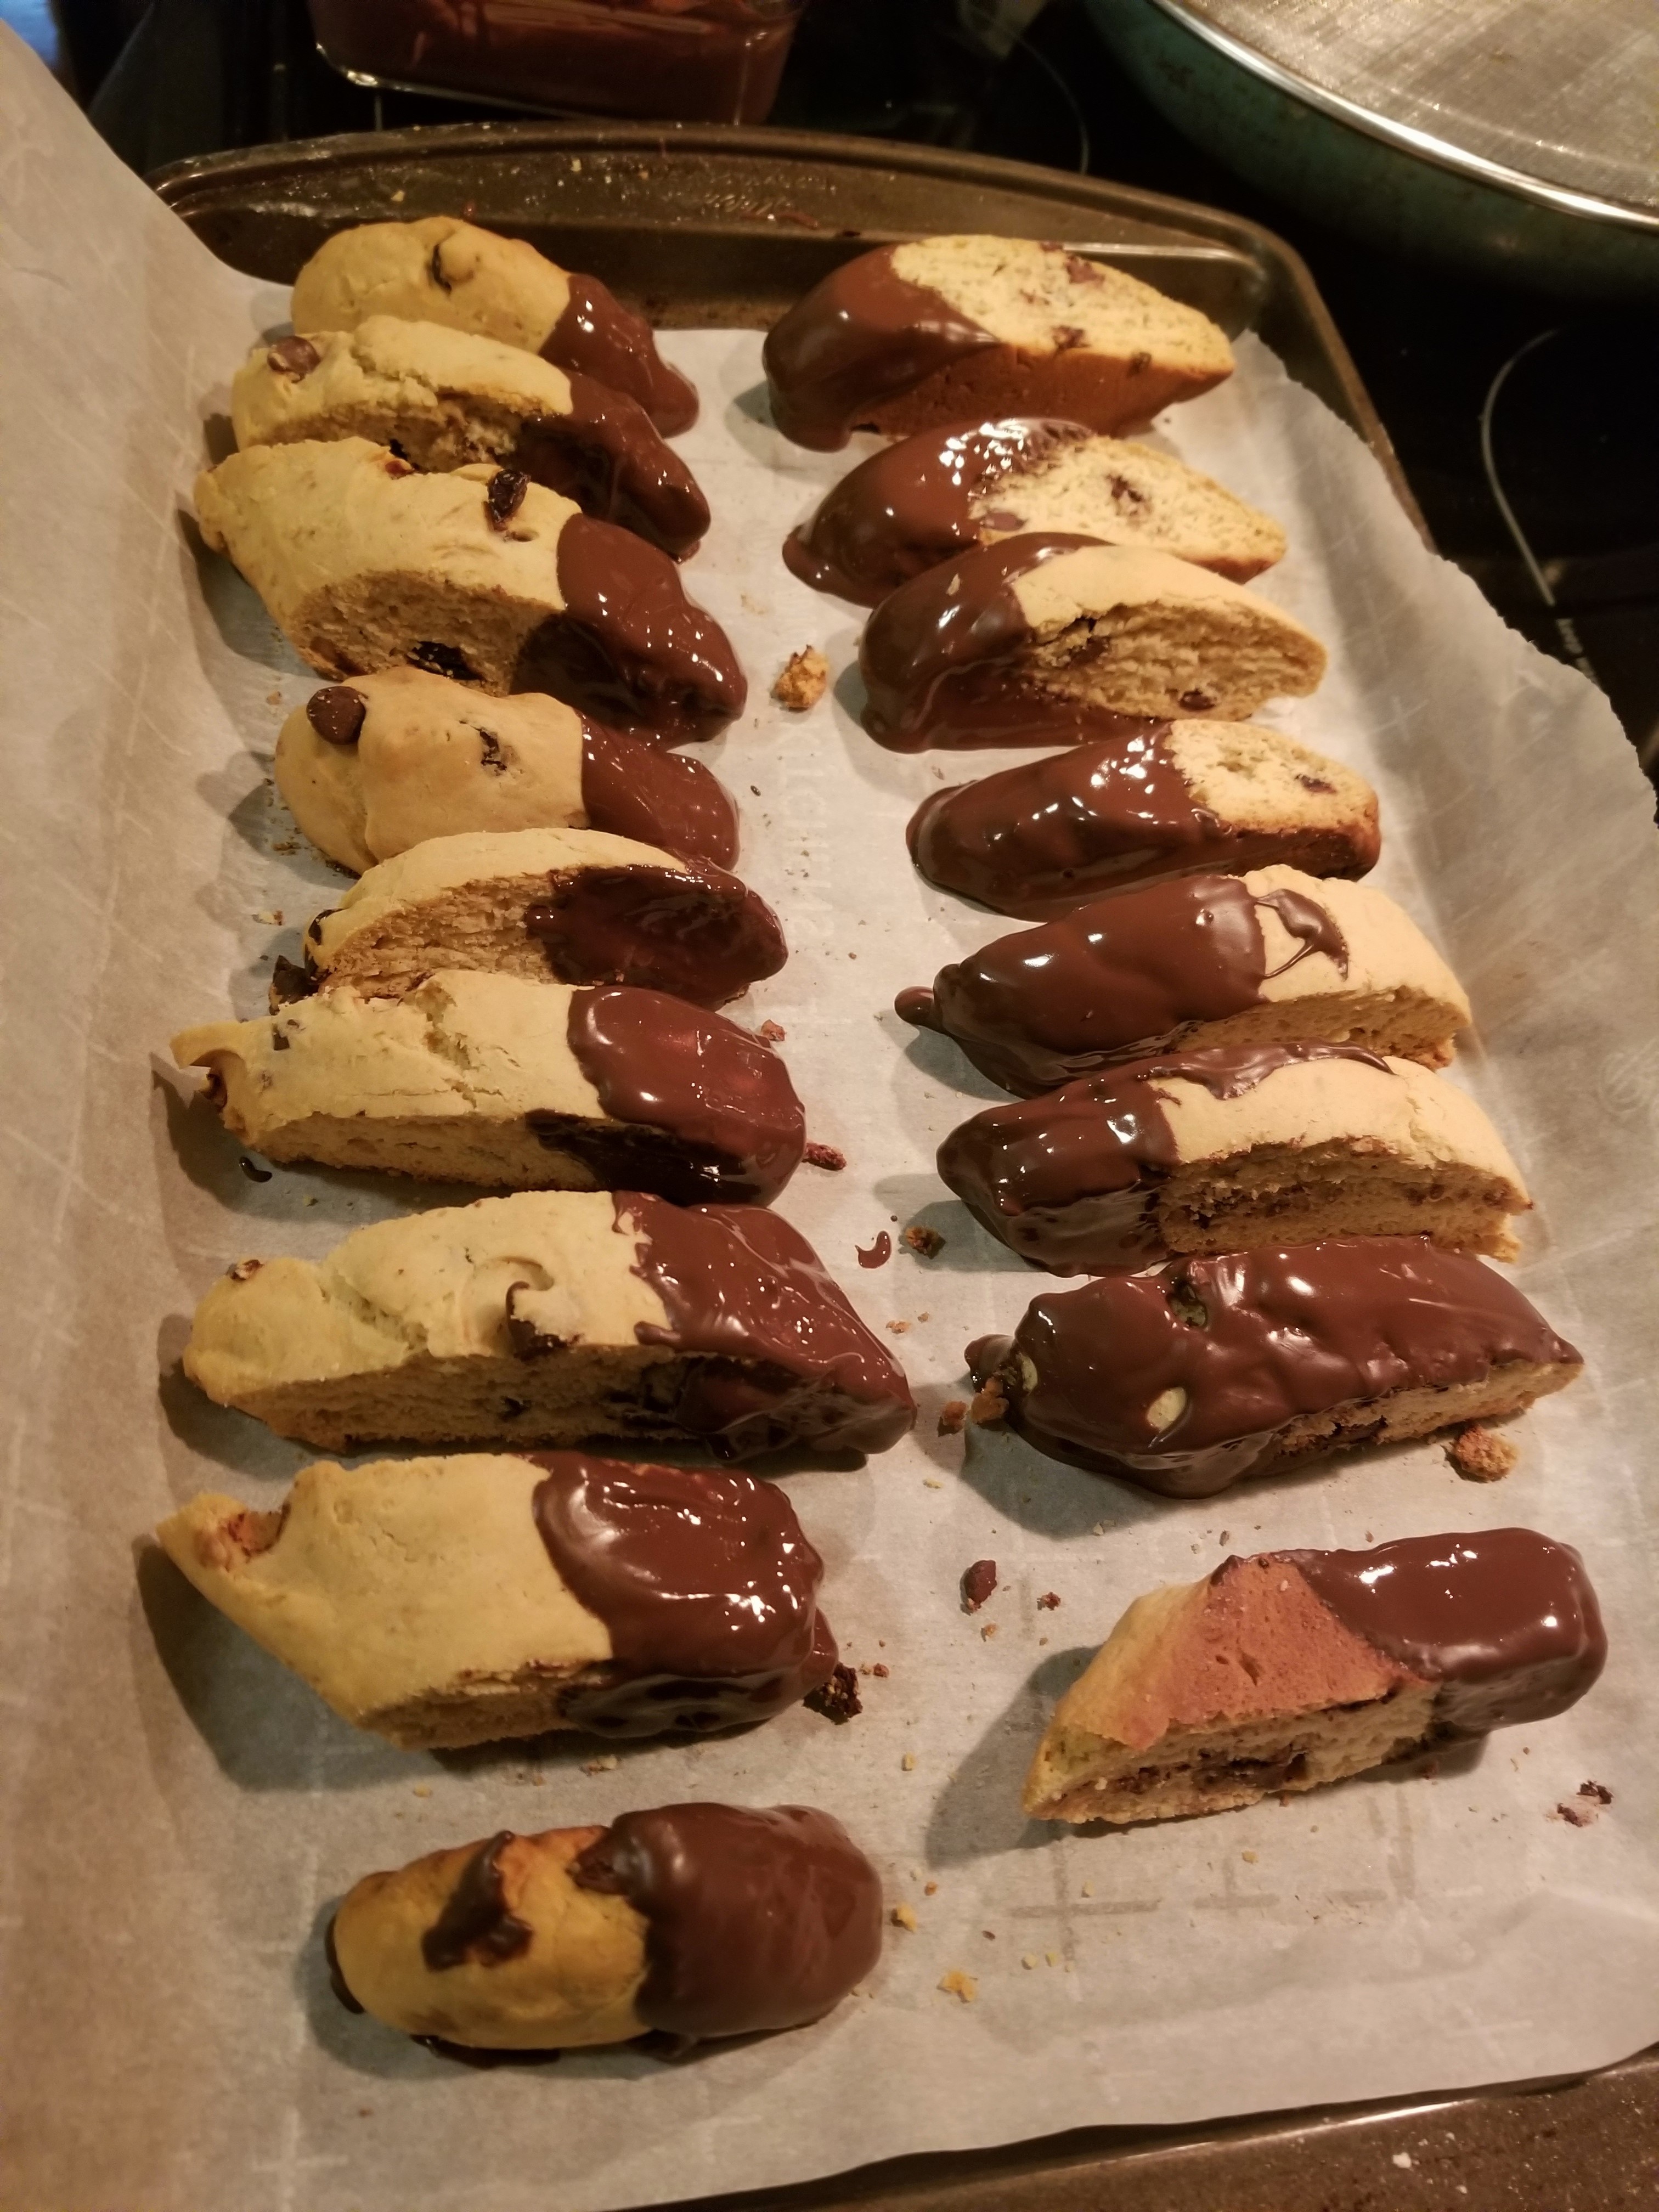 Chocolate-dipped biscotti was on the menu for a recent private event for Wounded Warriors Project, hosted by Plate Nextdoor instructor Shazia Razvi.